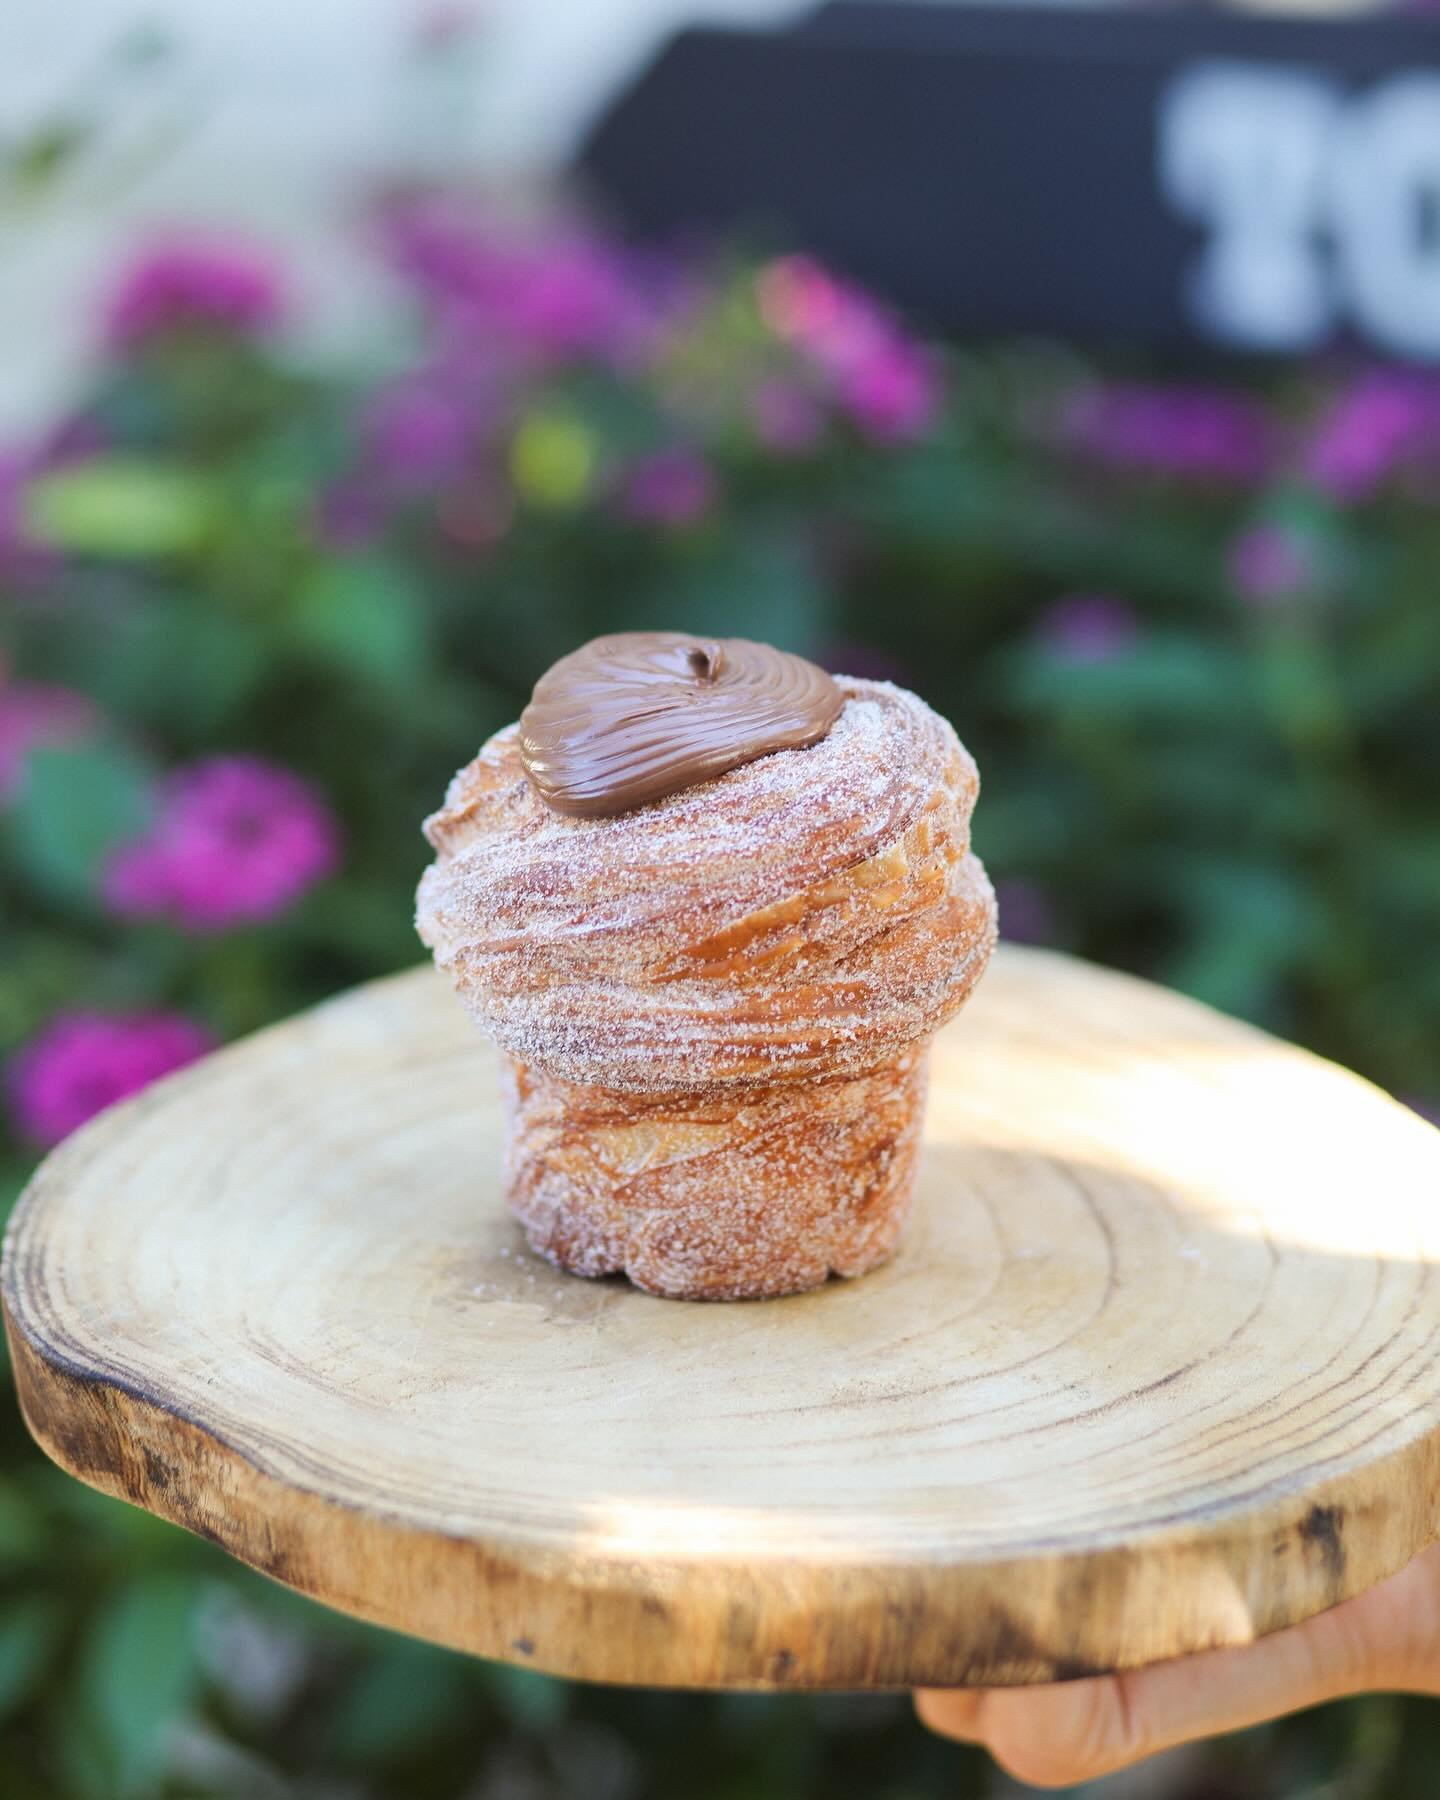 🤎🤍NUTELLA CRUFFIN🤍🤎
Layers of flaky croissant dough baked to golden perfection, showered in sugar crystals, and filled with silky Nutella, all the way through 😮&zwj;💨 Three days in the making for one indulgent pastry moment. 

Available daily t